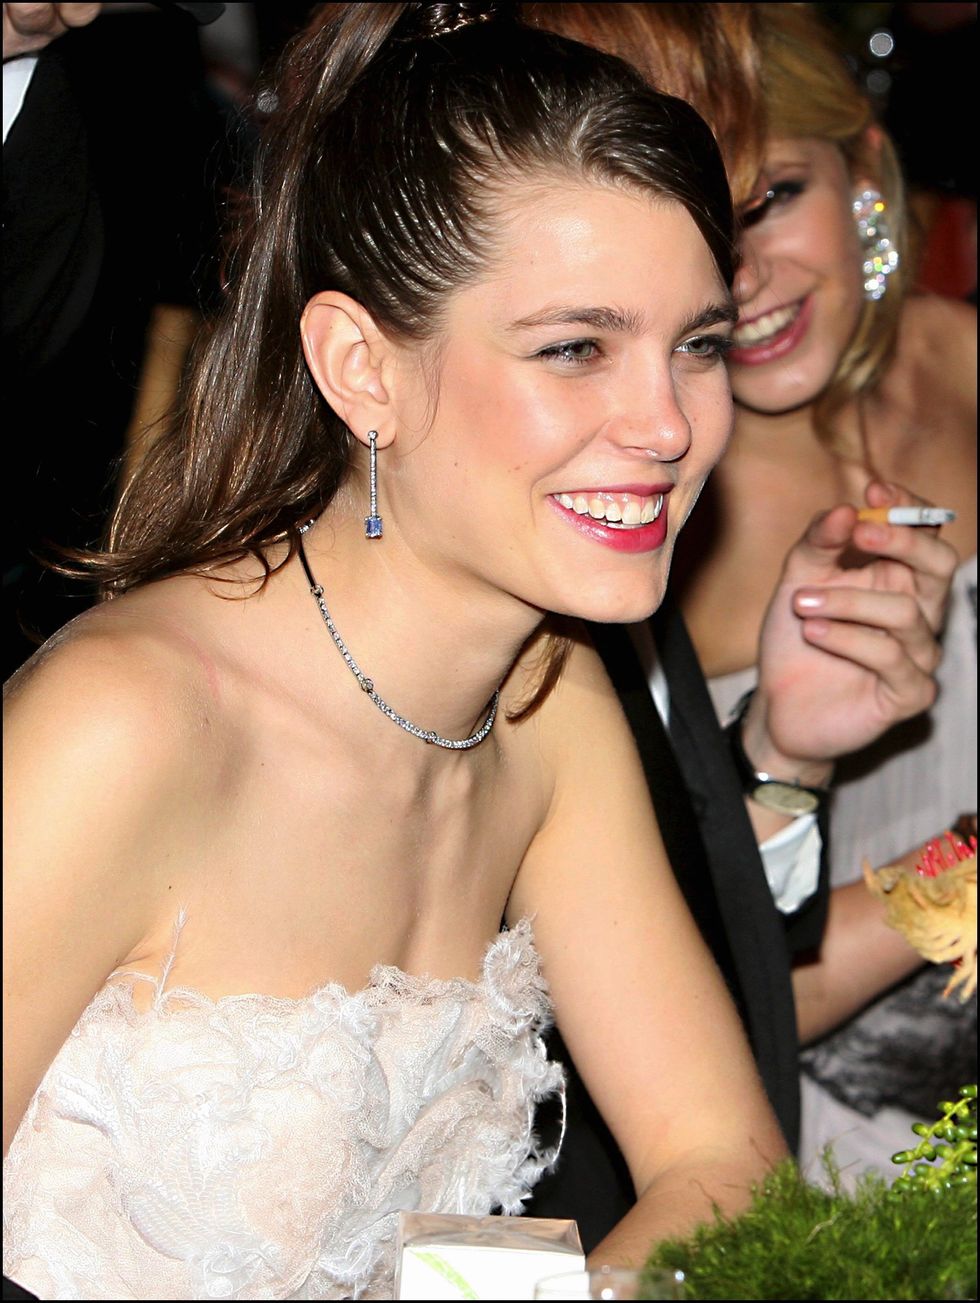 rose ball in monaco on march 25, 2006